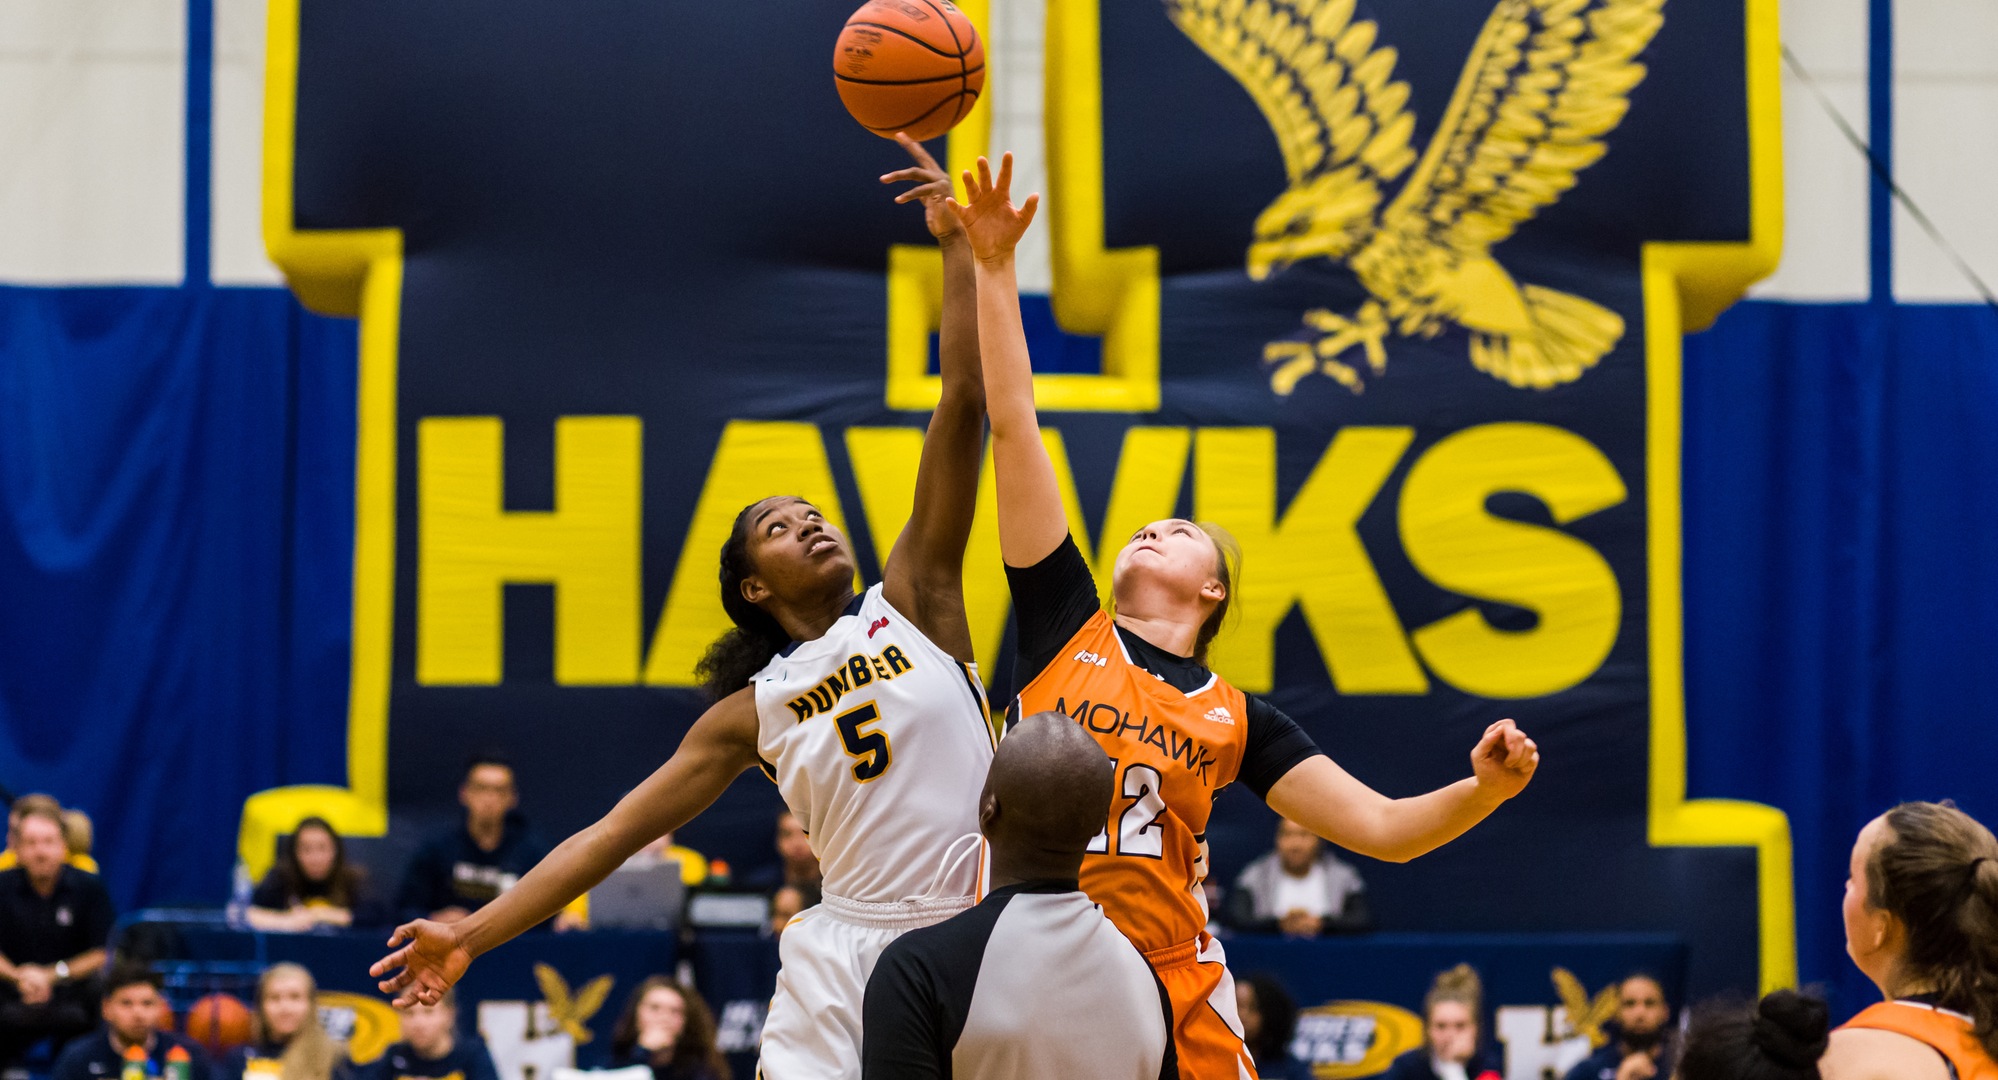 HAWKS ROLL TO 92-63 WIN OVER RIVAL MOHAWK AT HOME